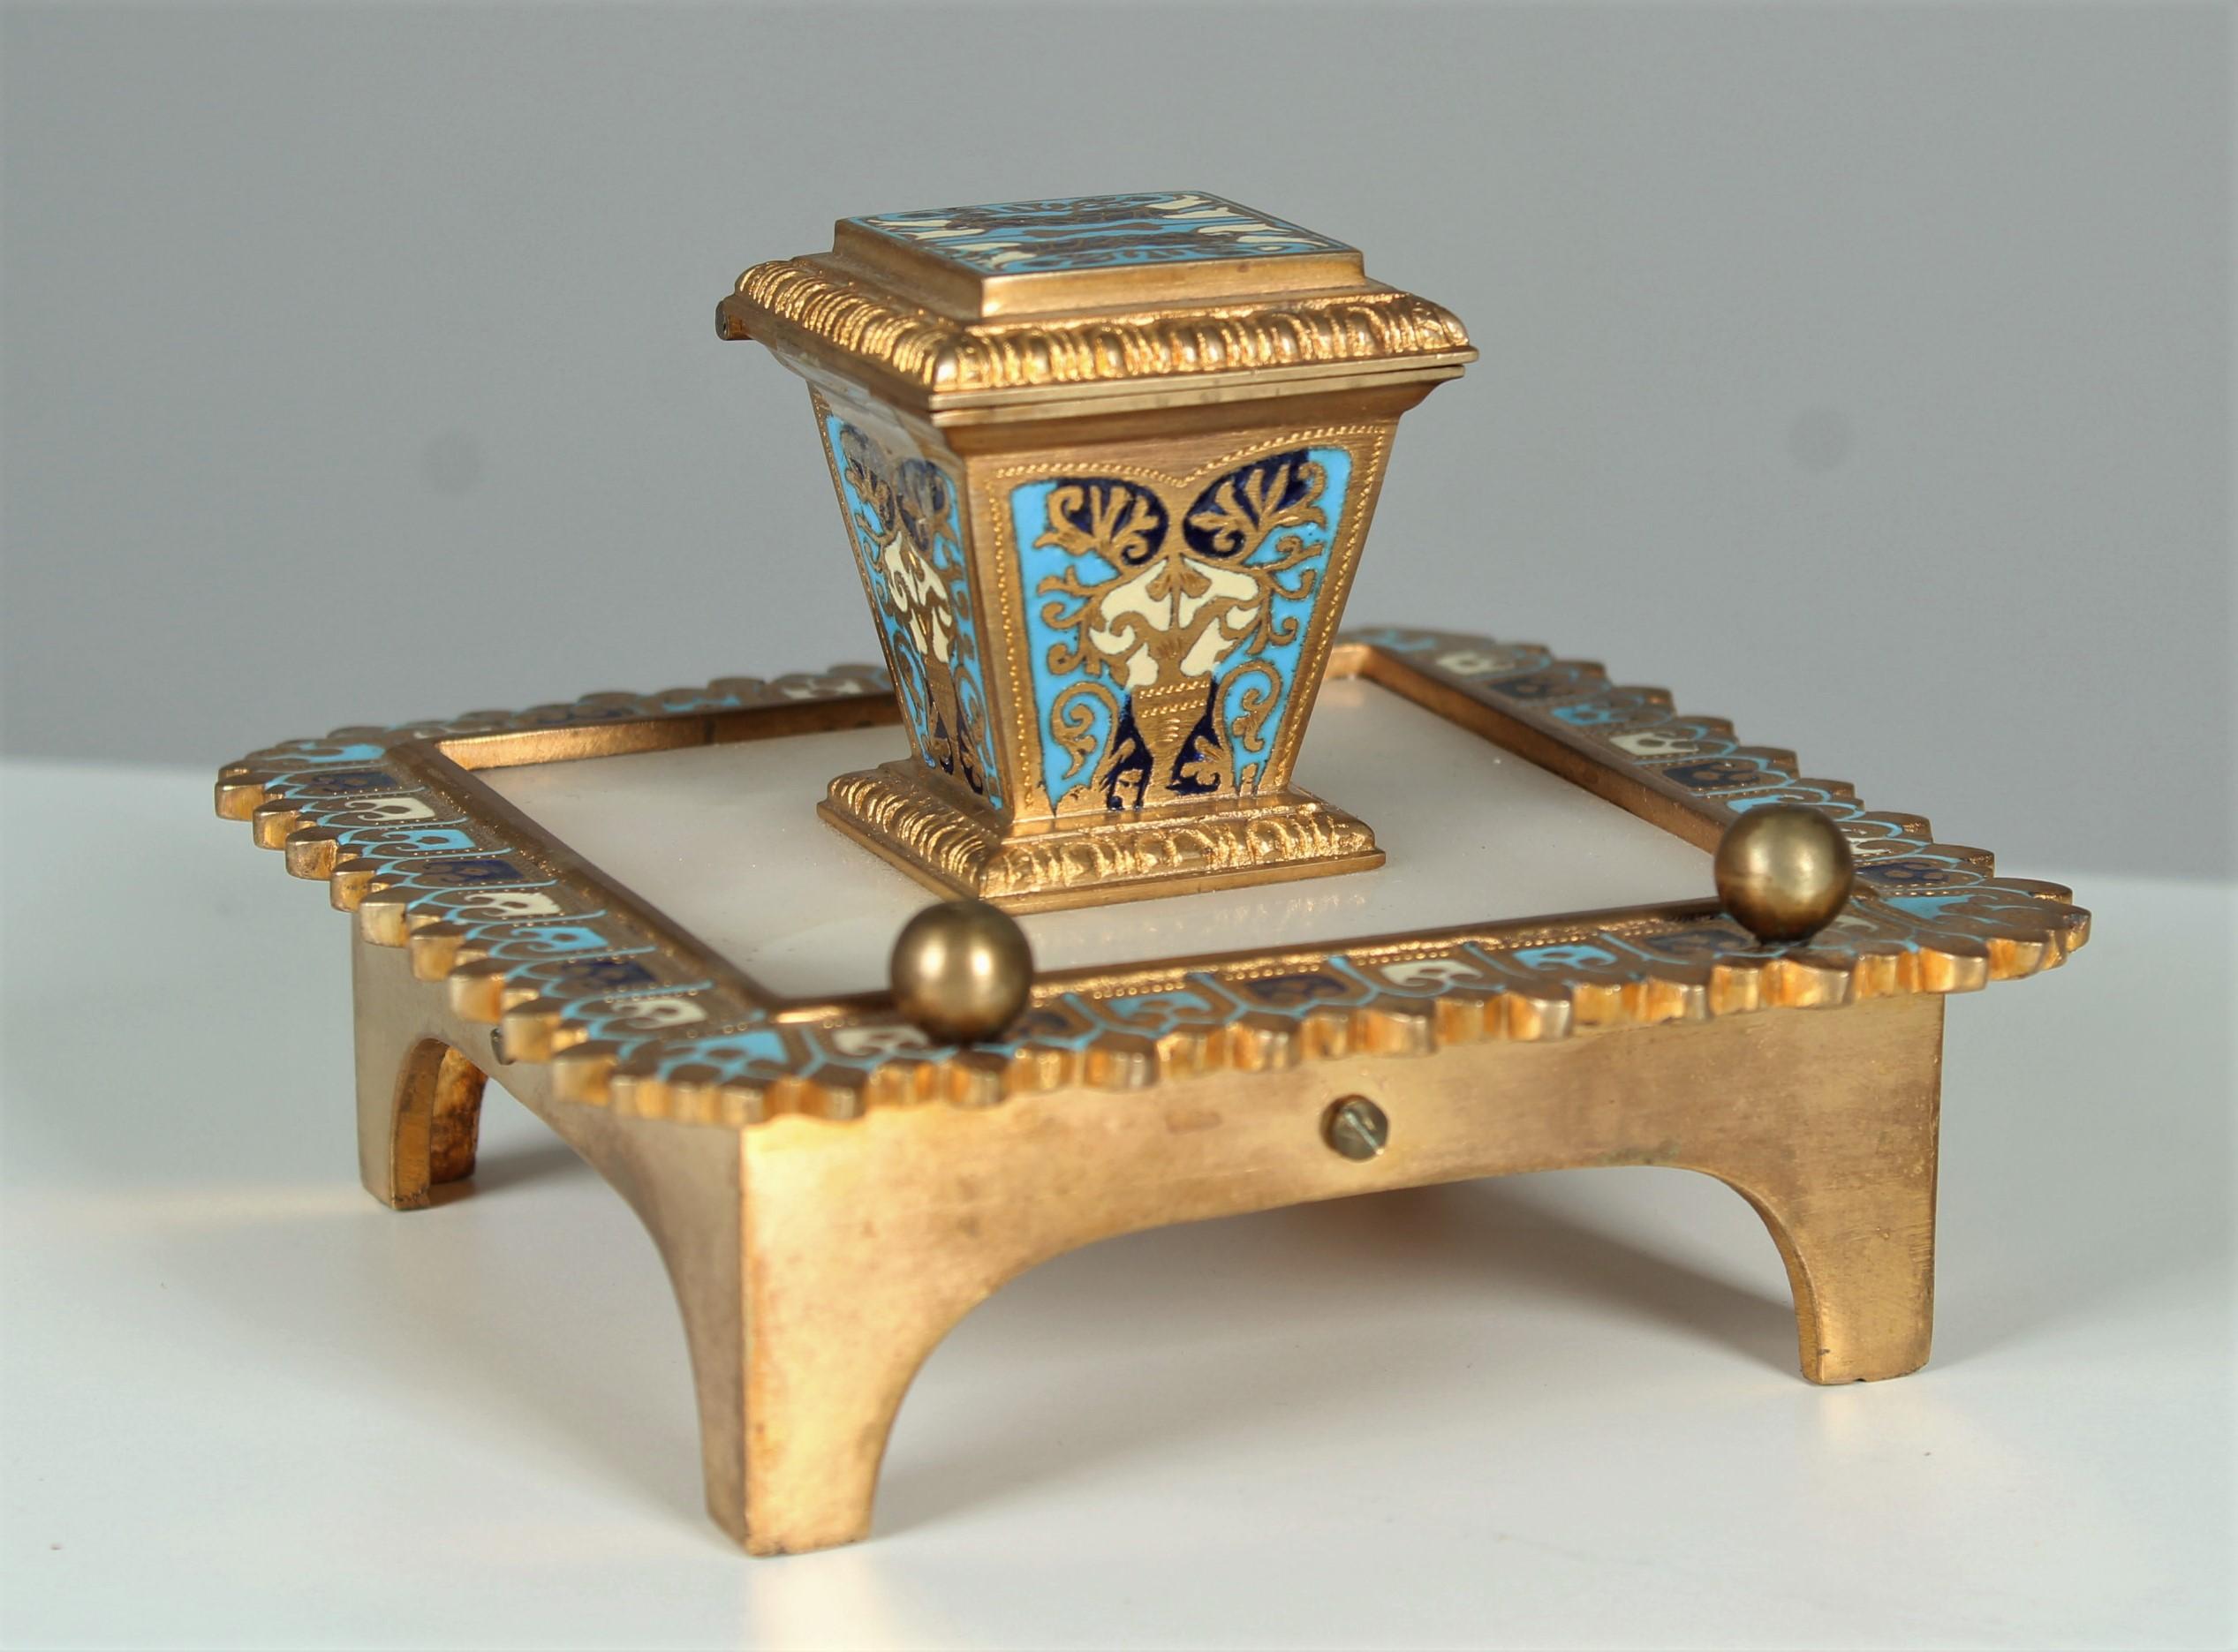 Beautiful antique inkwell made from gilded bronze. 
Nicely coloured ceramic parts.
The plate is made of marble.
Nice bronze work with a well preserved gilding.
The original glass insert is existing.